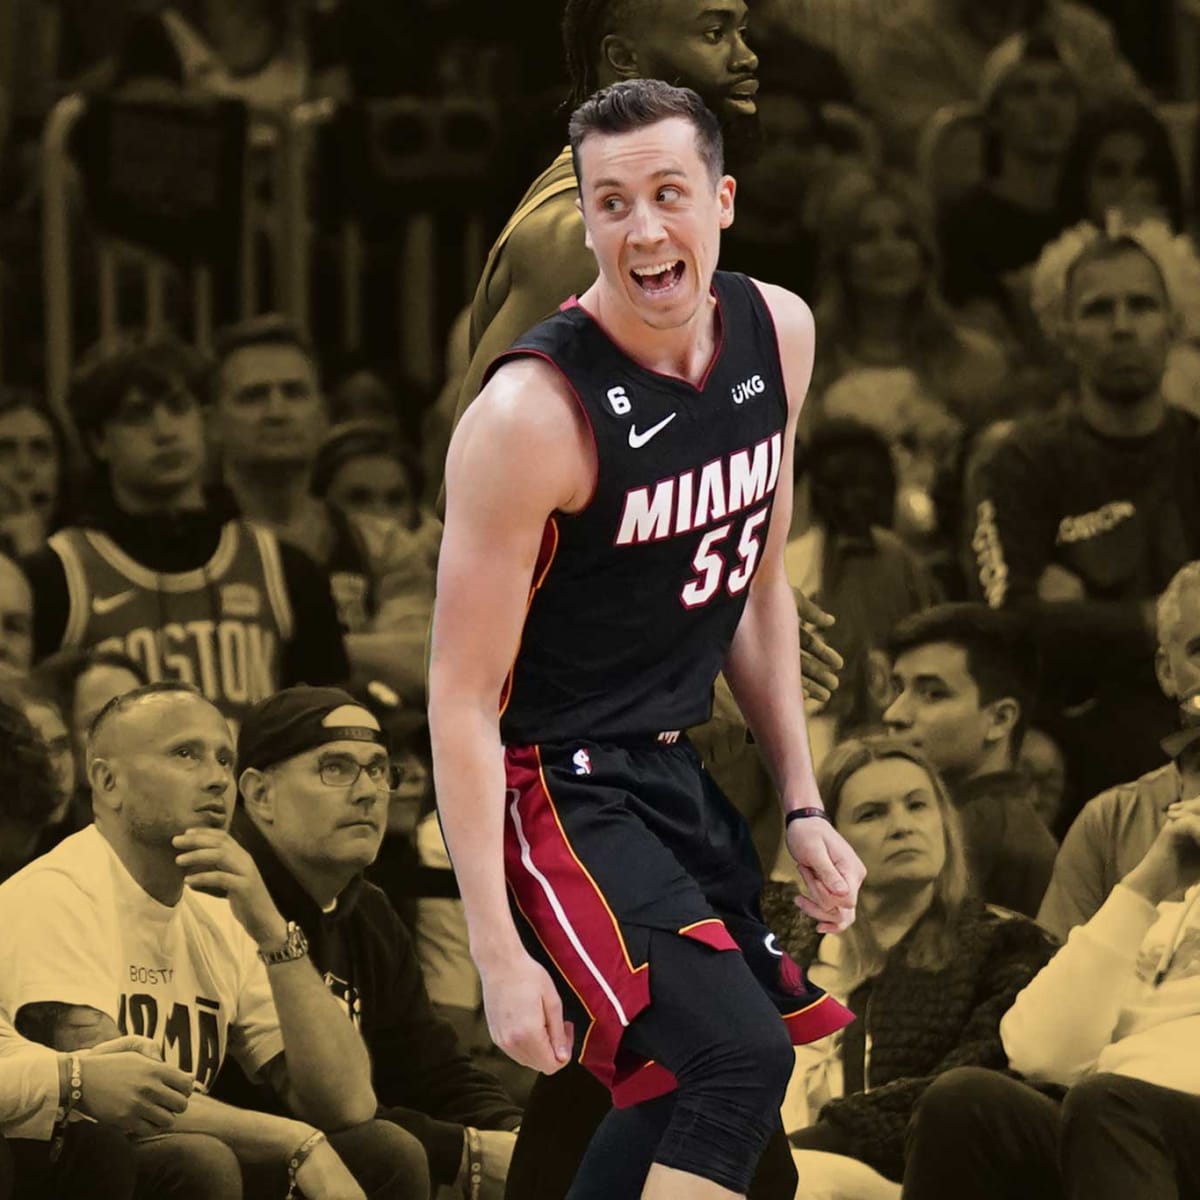 Heat Rumors: Duncan Robinson Believed to Be Available Ahead of NBA